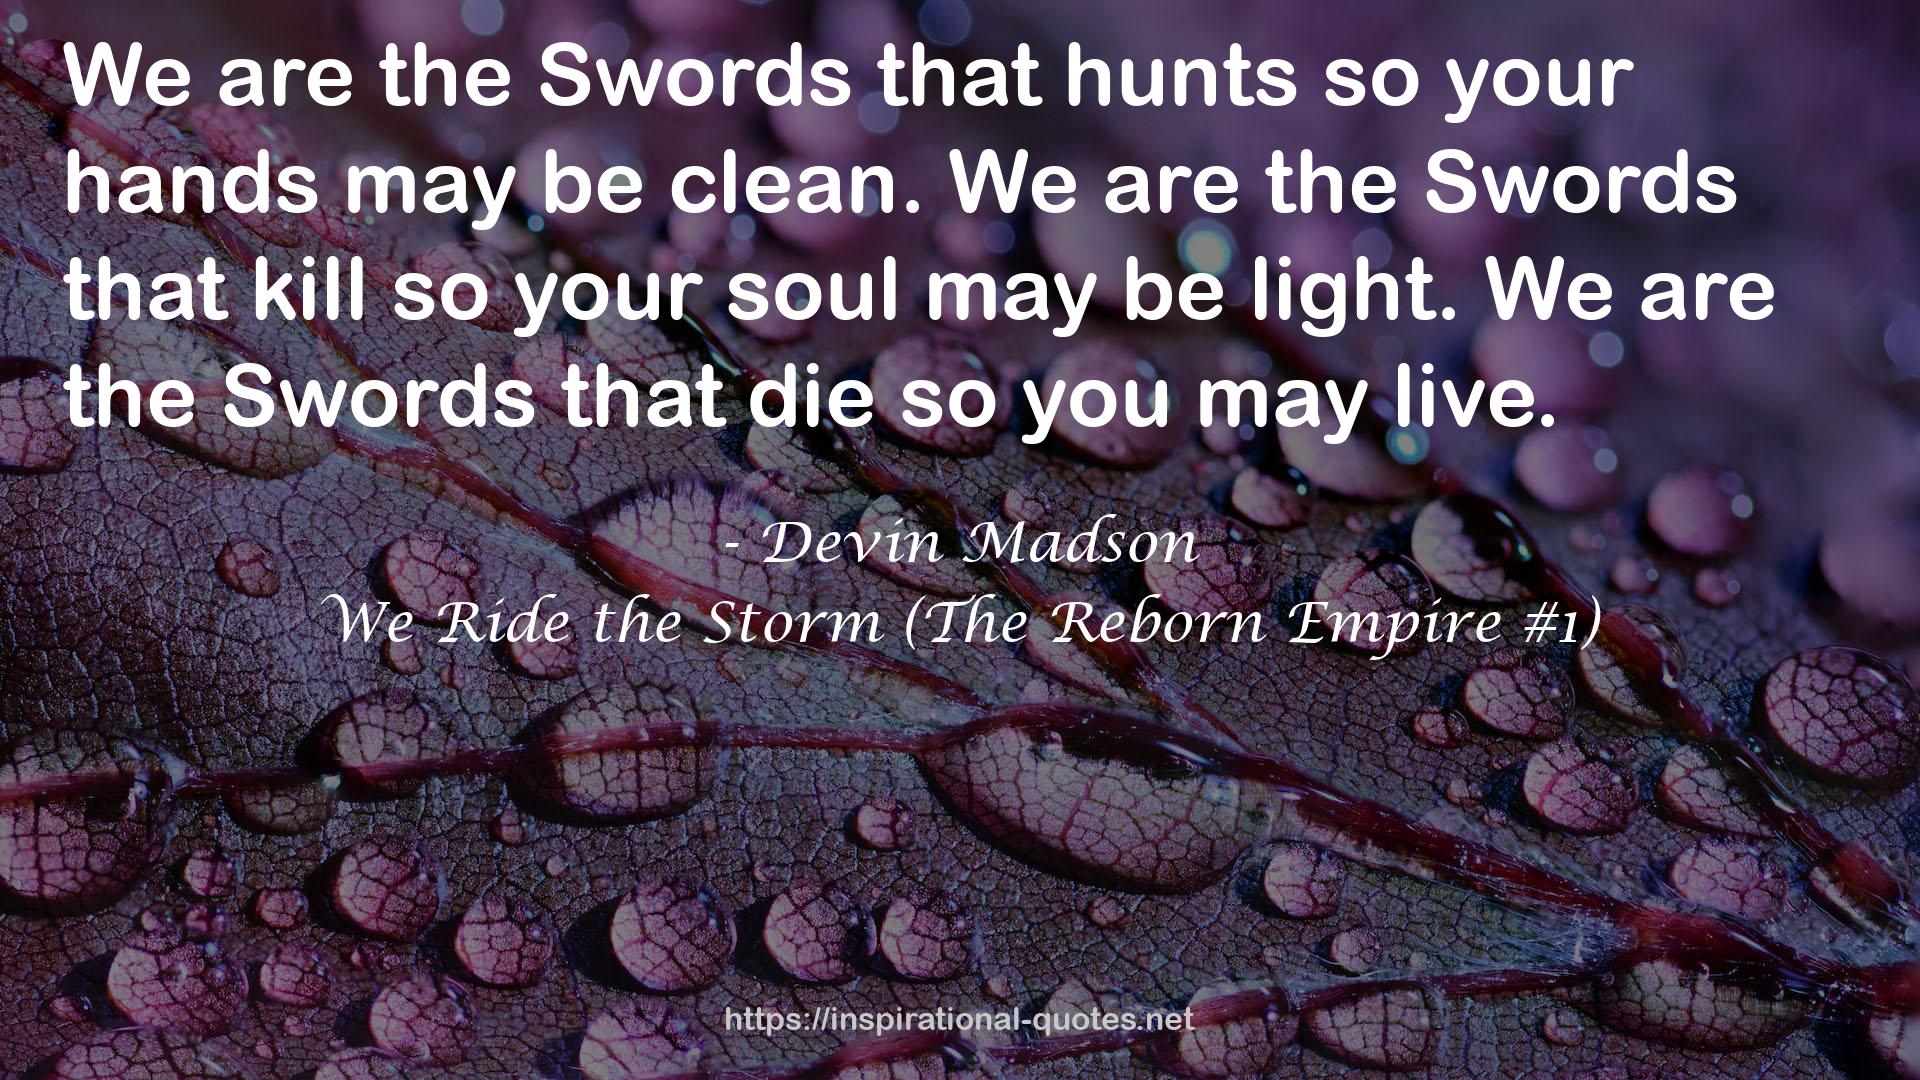 We Ride the Storm (The Reborn Empire #1) QUOTES